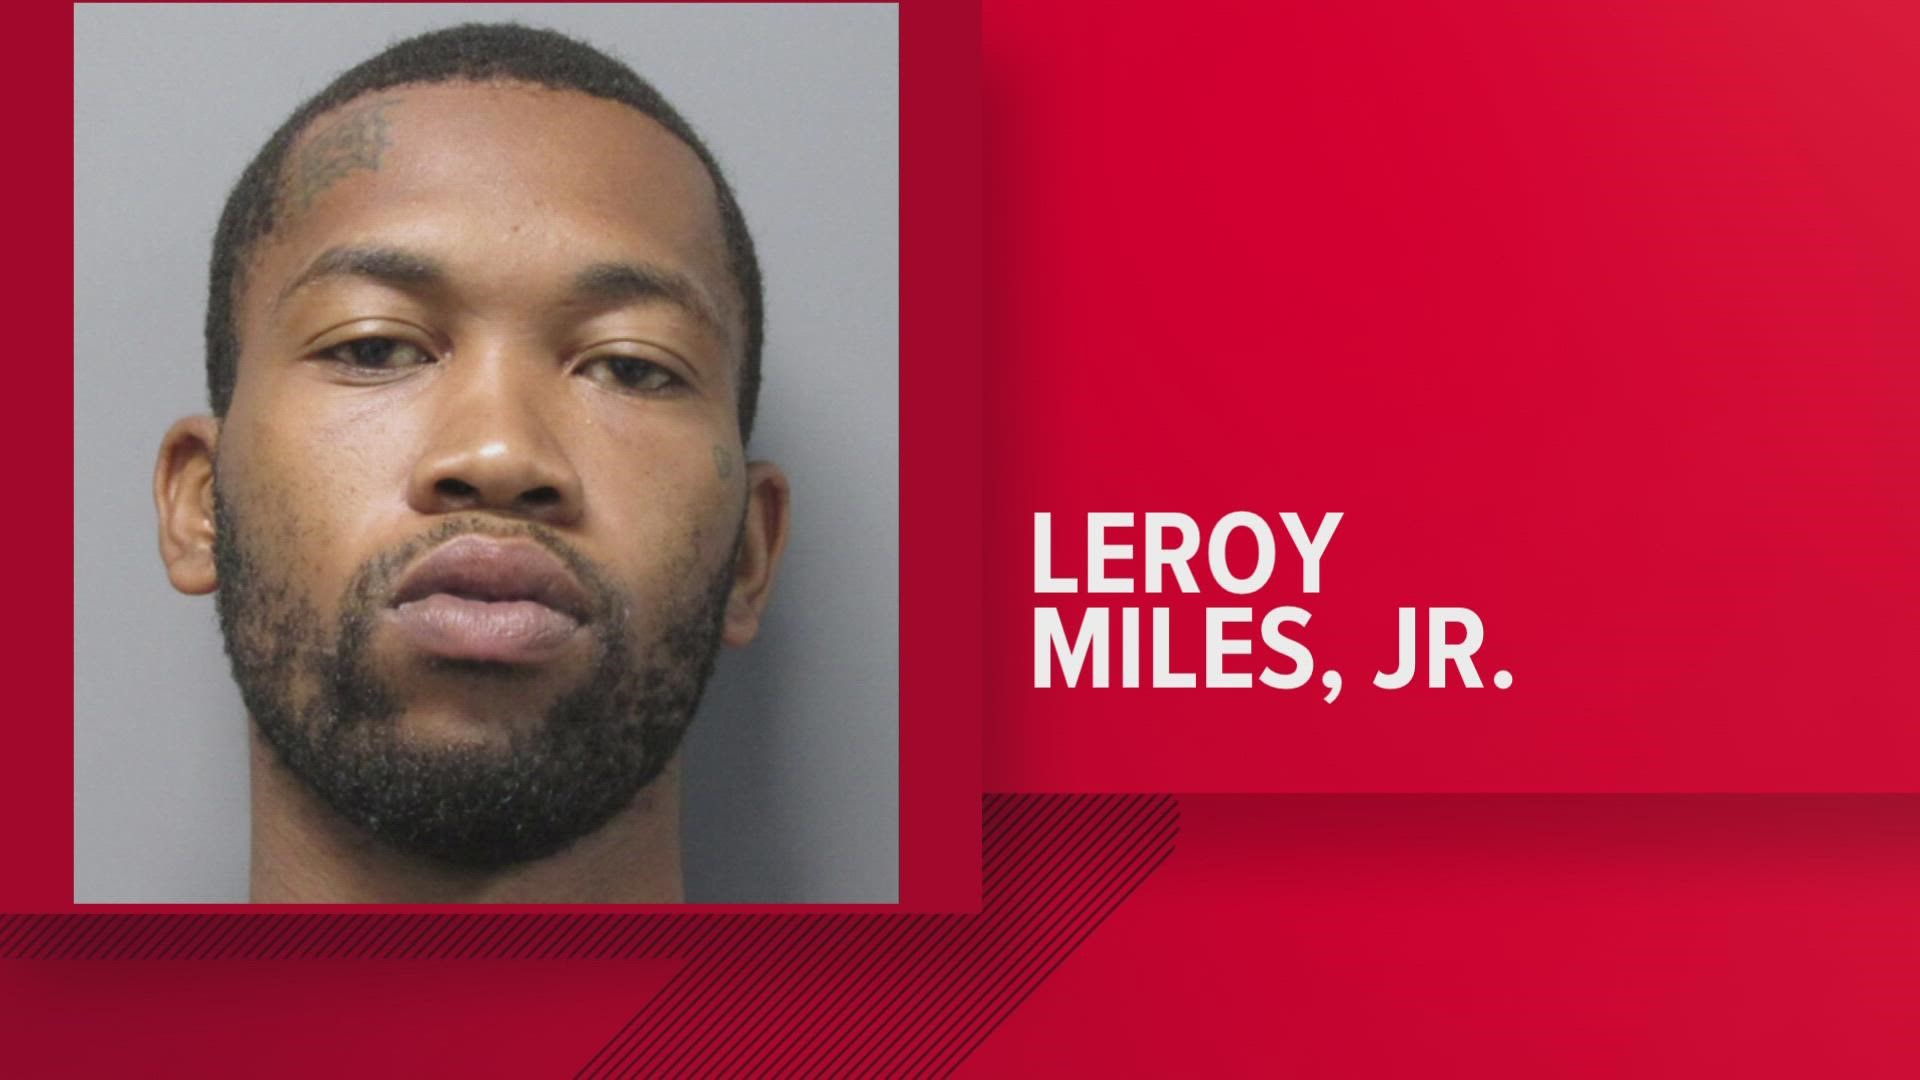 23-year-old Leroy Miles Jr. has been arrested after he escaped the Lafourche Parish Correctional Facility Friday night.